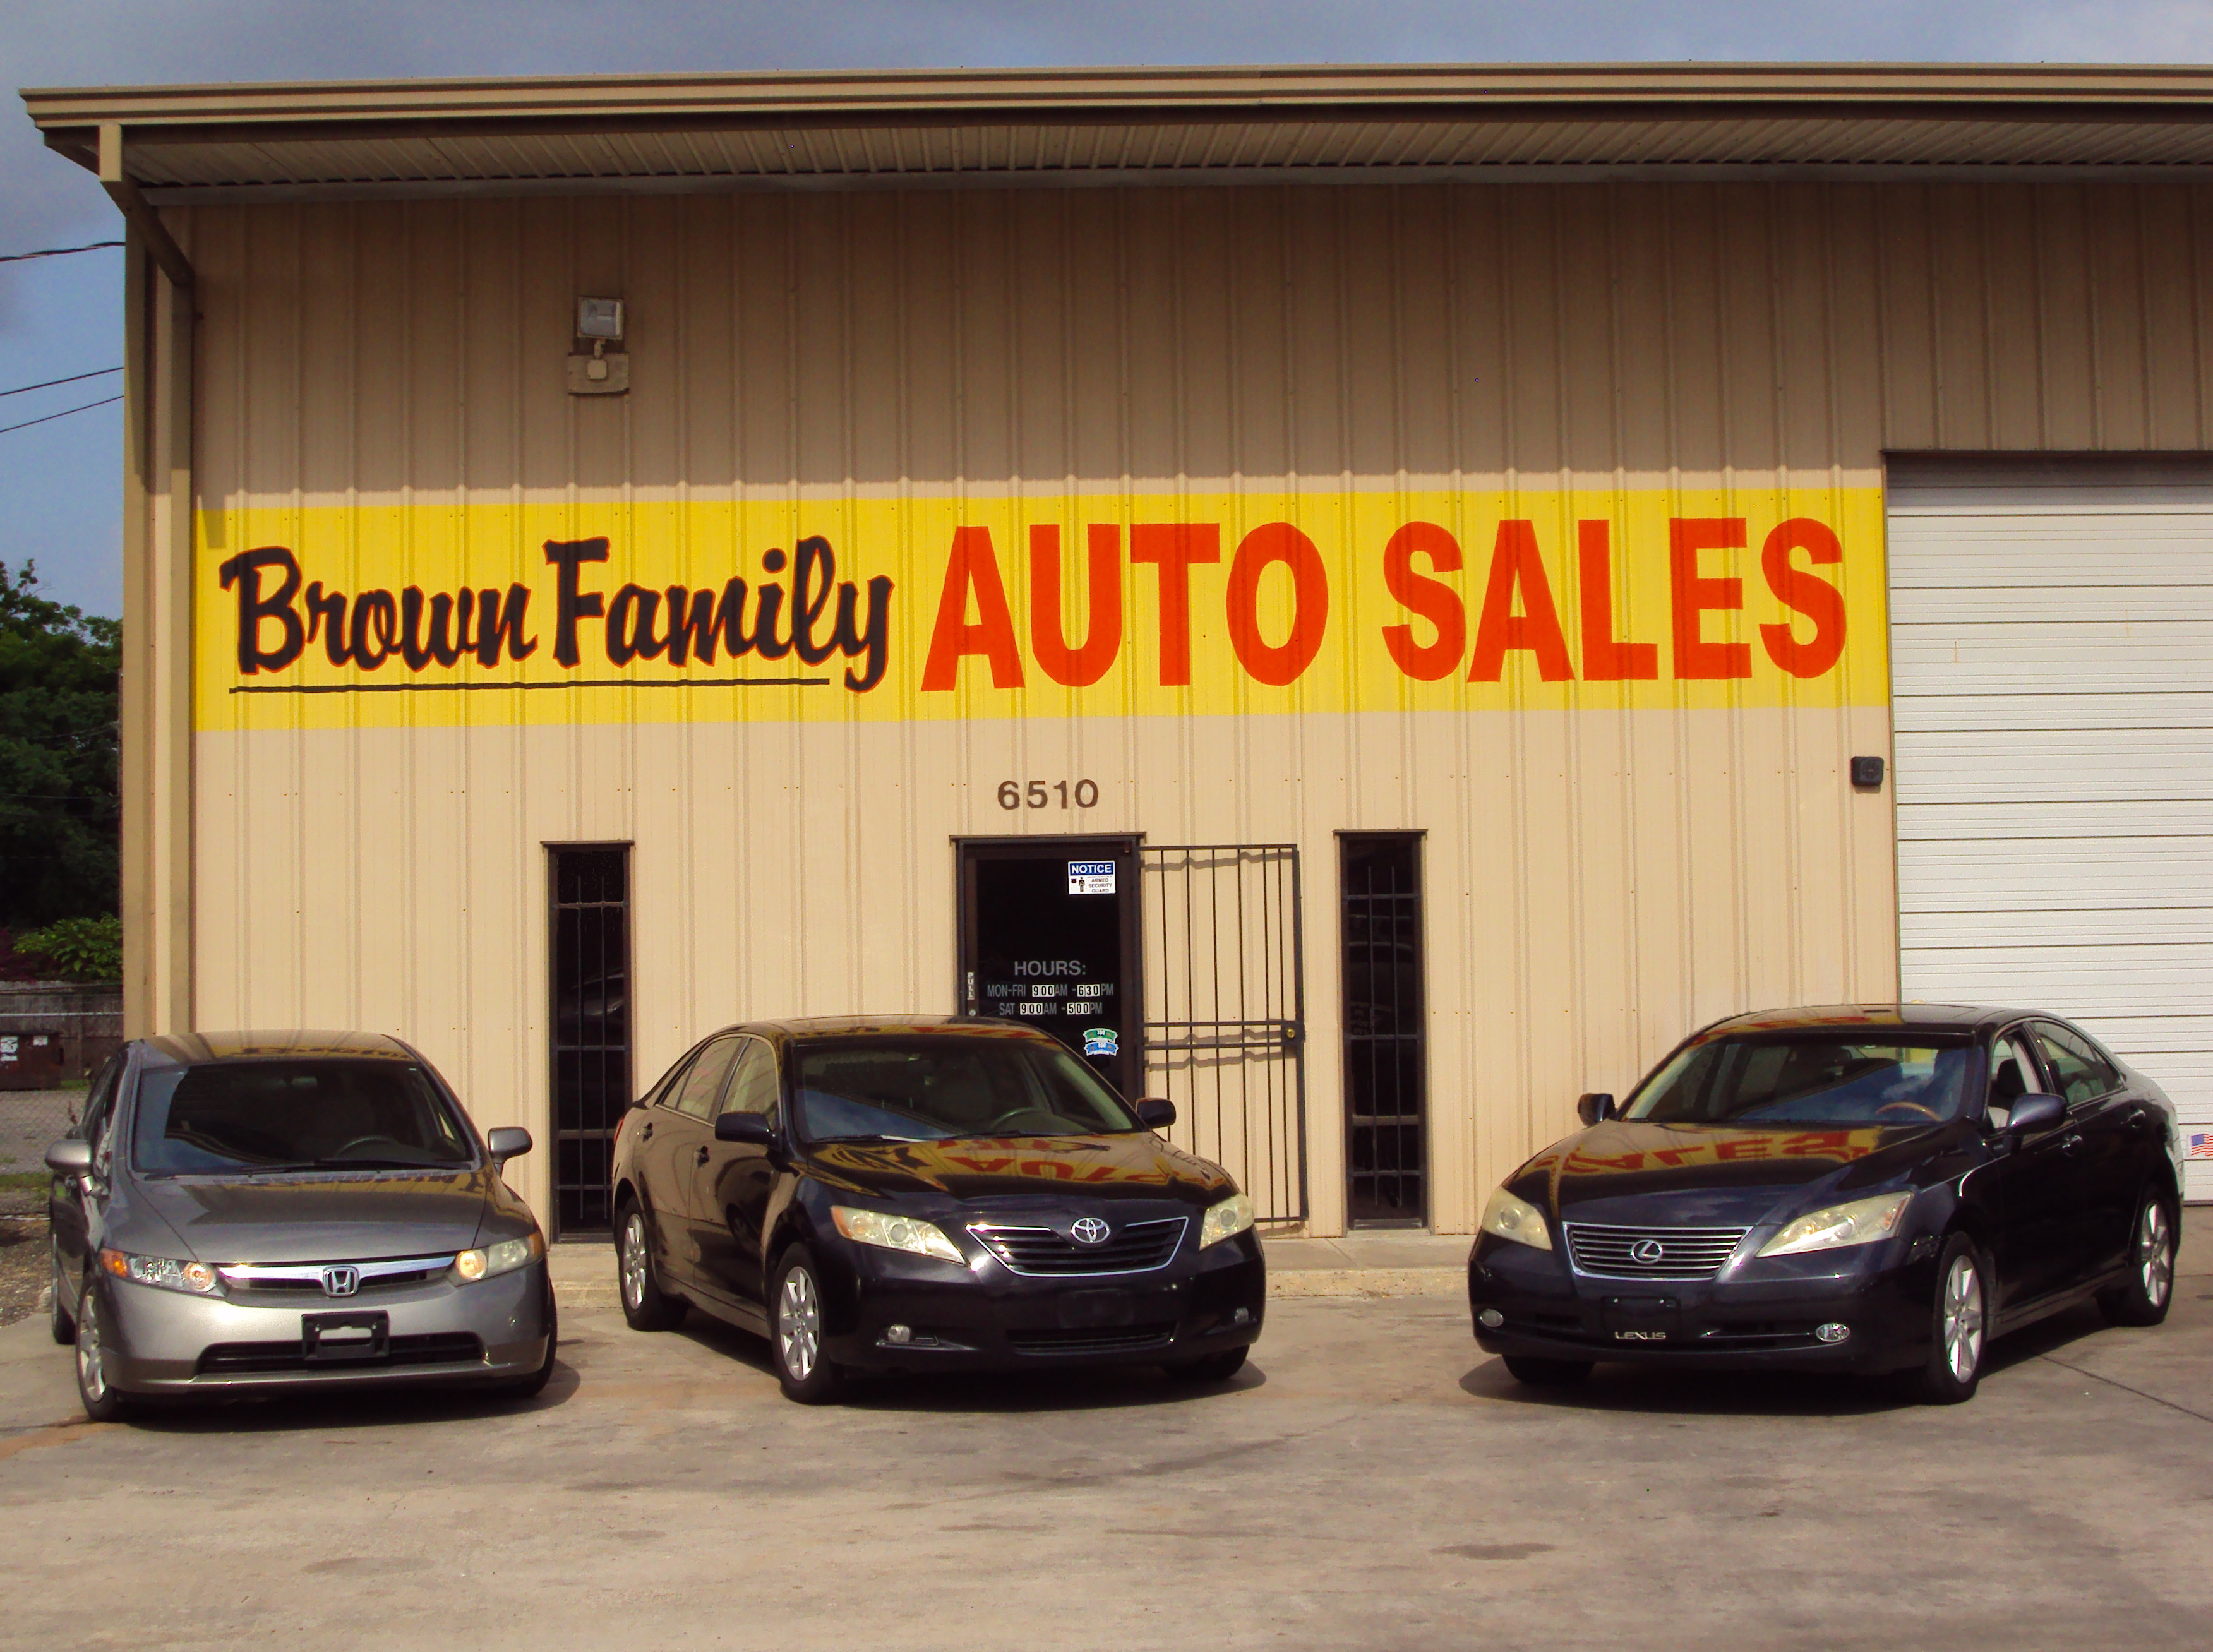 Brown Family Auto Sales Wins City Beat News Spectrum Award For Excellence In Customer Satisfaction